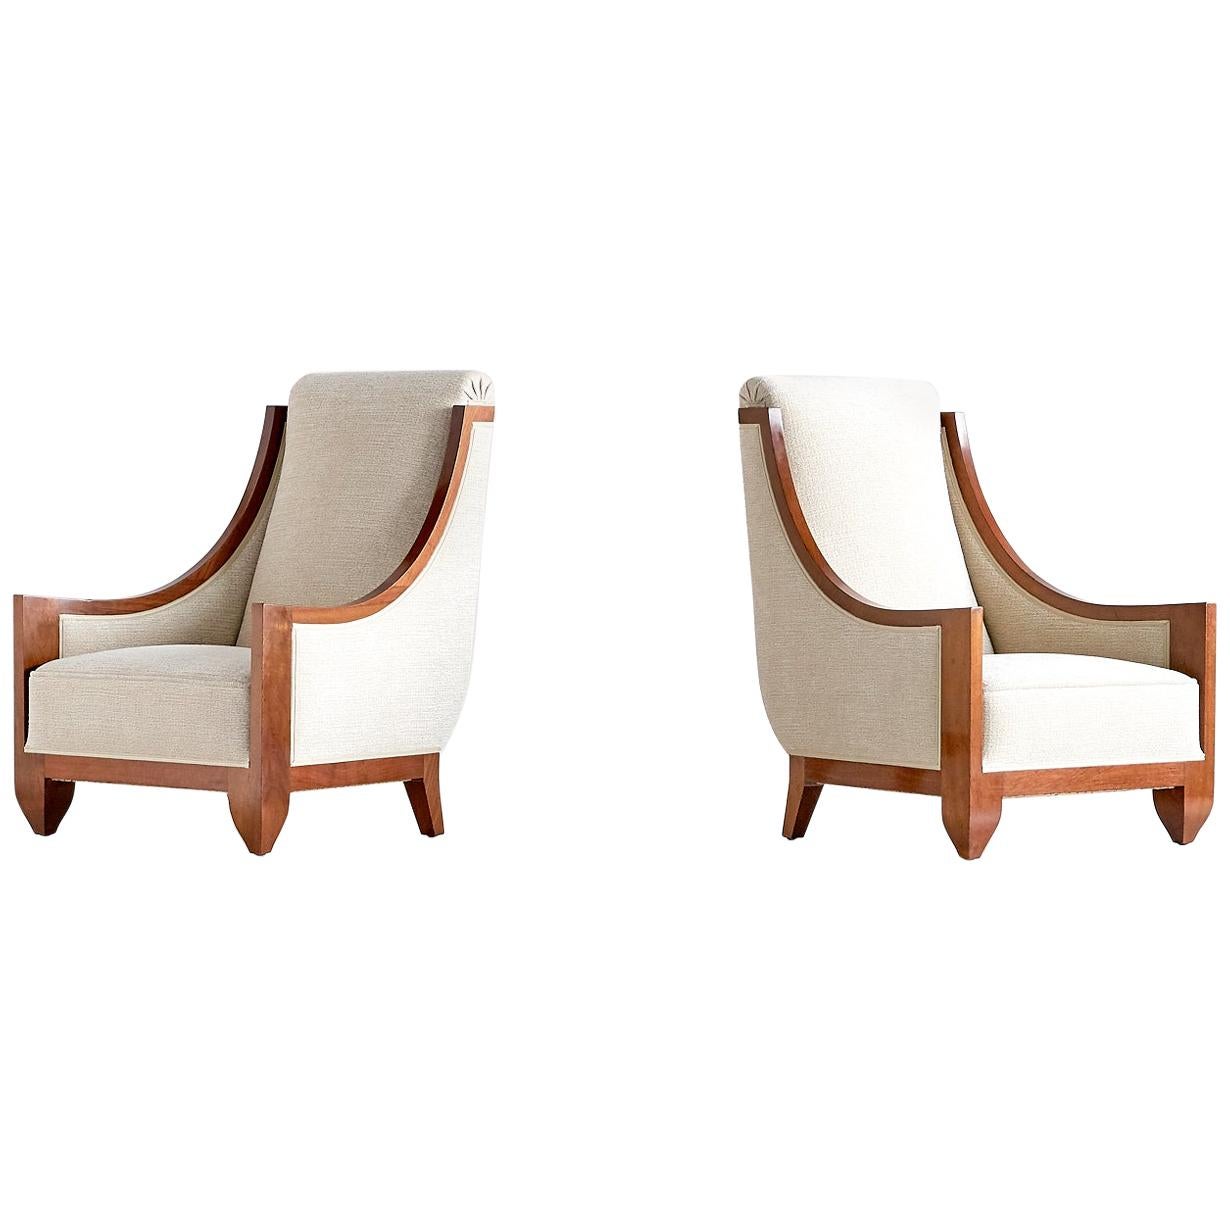 André Sornay Pair of Art Deco Armchairs in Walnut, France, Late 1920s